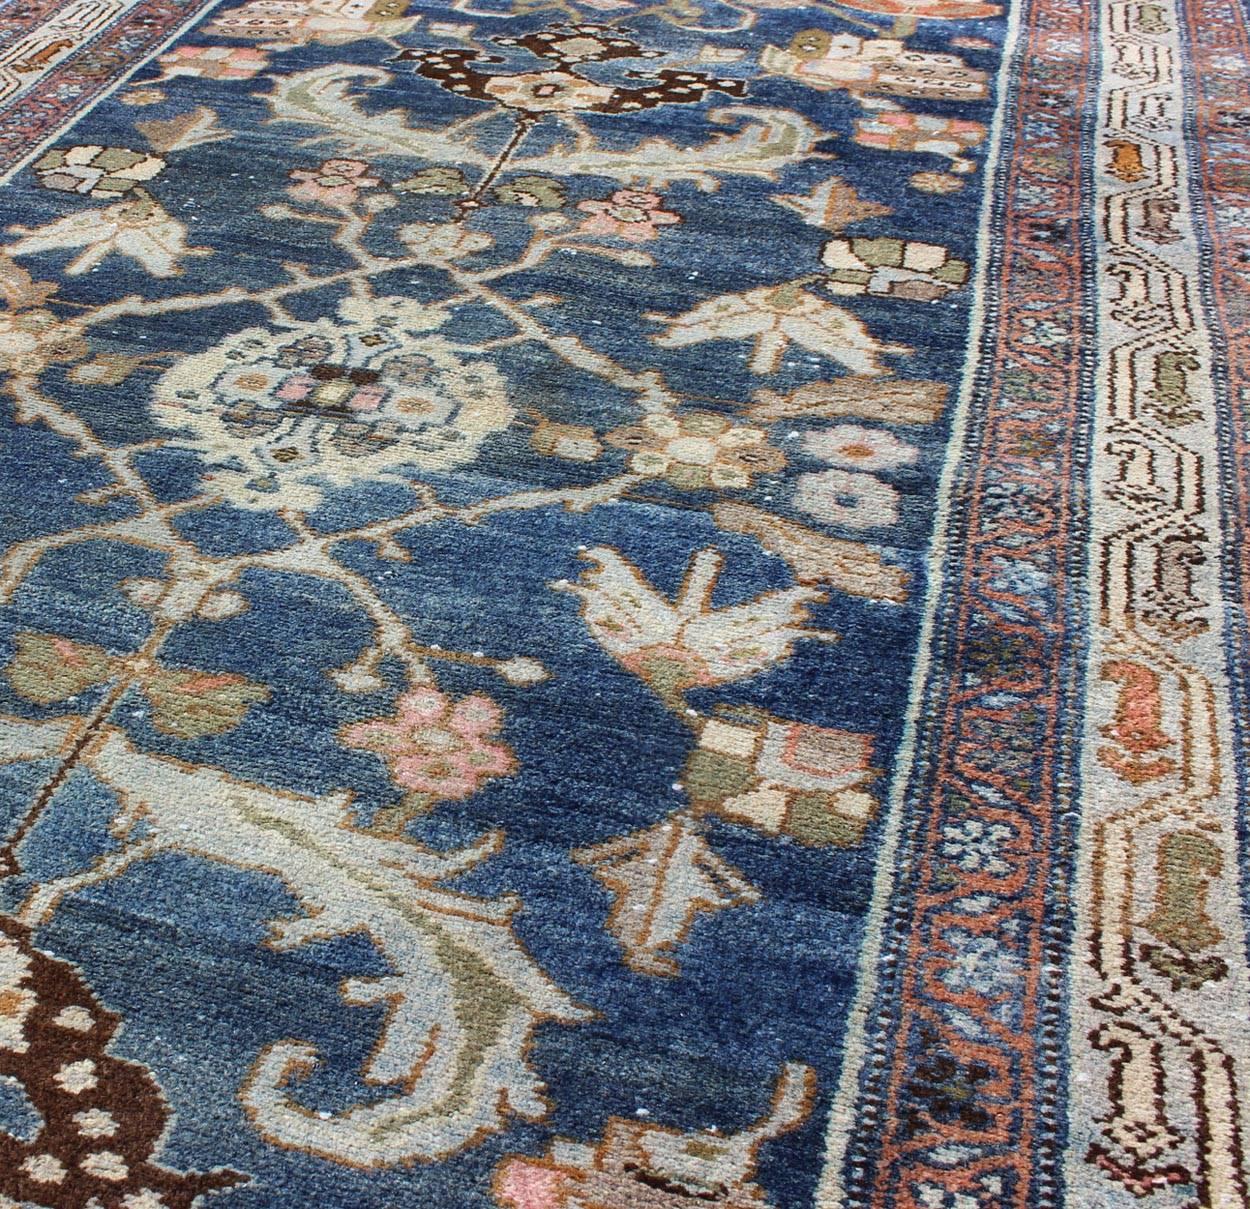 Malayer Antique Persian Hamedan Rug with Dark Blue Field and Stylized Floral Design